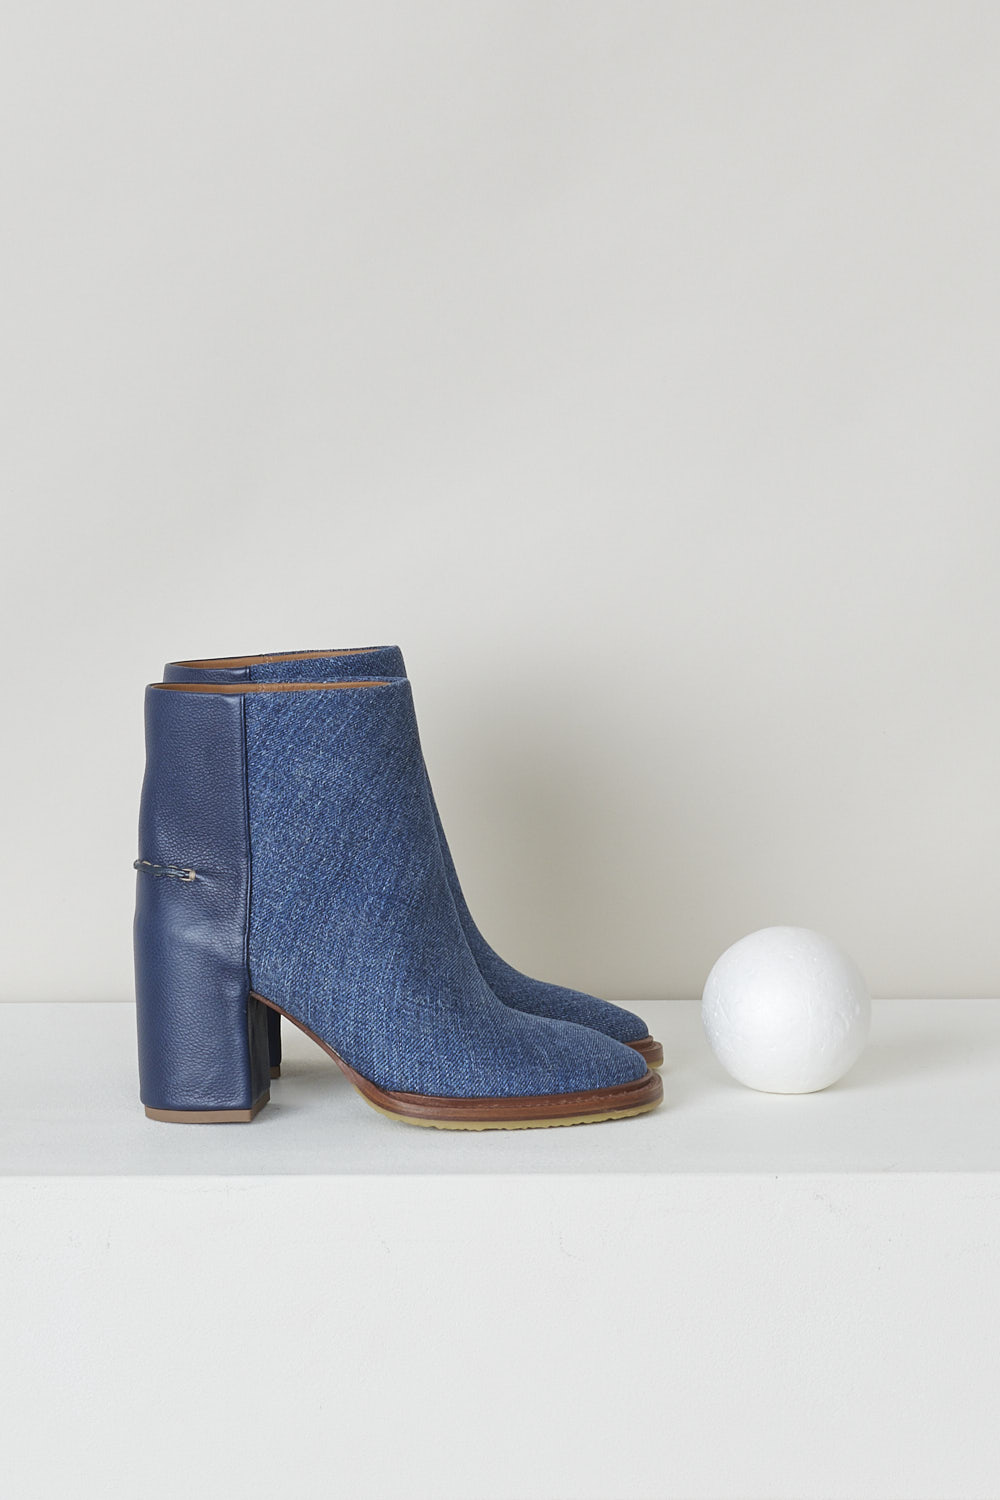 CHLOÃ‰, NAVY BLUE DENIM ANKLE BOOTS, CHC22S521X145C, Blue, Side, These dark navy denim slip-on ankle boots have a blue leather-clad block heel with white stitching on the ankle. The boots have a round toe and a contrasting brown sole. 

